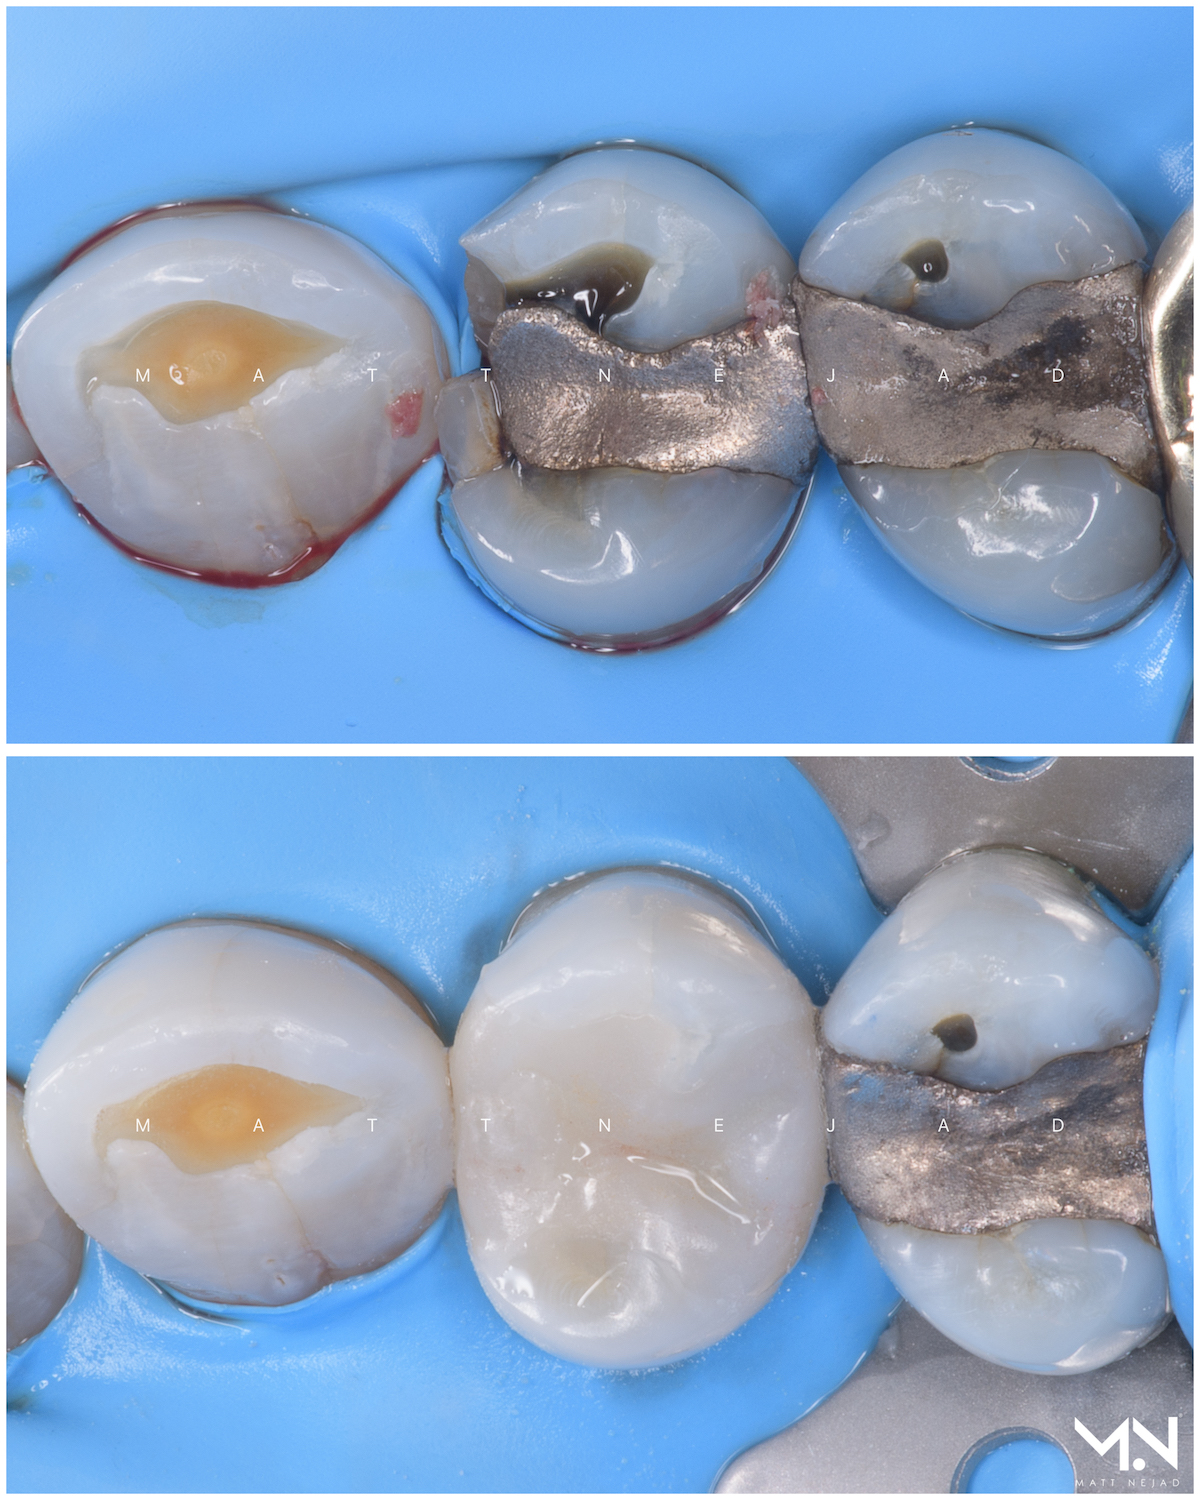 Biomimetic restoration - Replace failed silver filling with a ceramic inlay